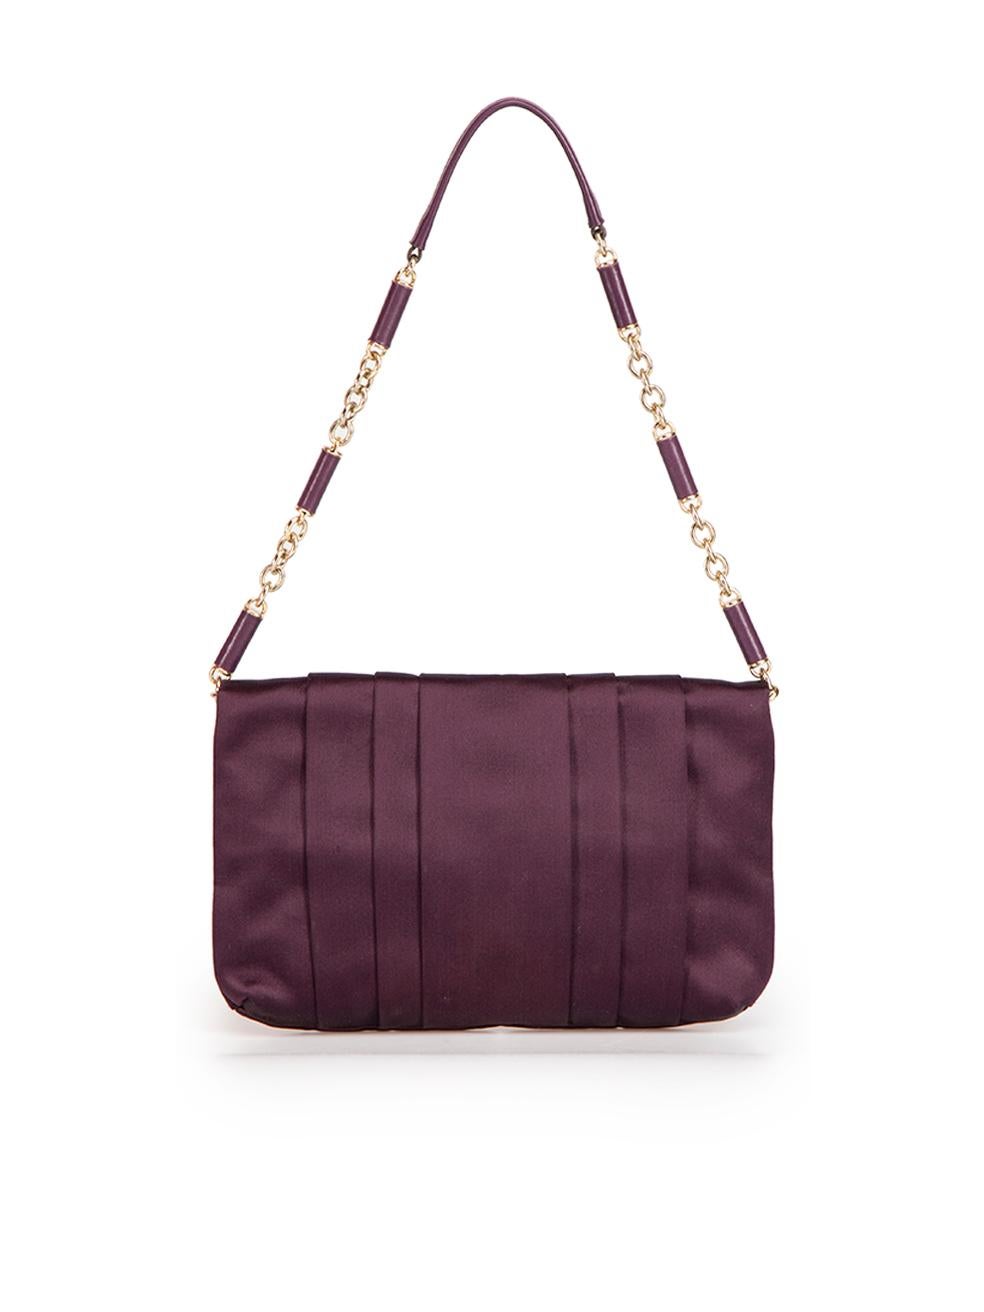 Anya Hindmarch Purple Pleated Satin Clutch In Excellent Condition For Sale In London, GB